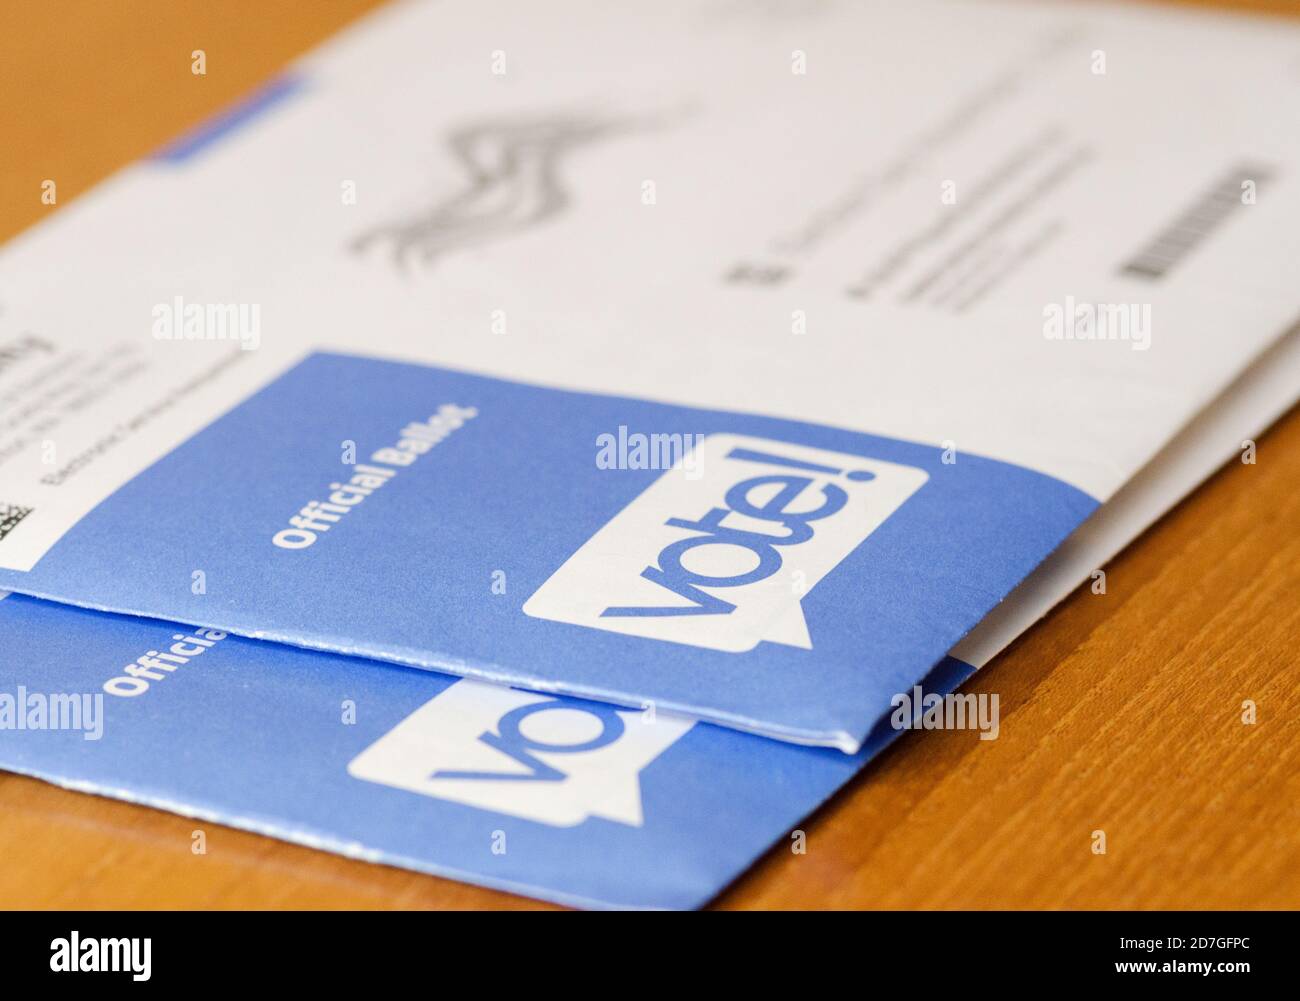 Two official ballots still in envelopes waiting to be filled out and mailed in or dropped off at a ballot drop box. Stock Photo